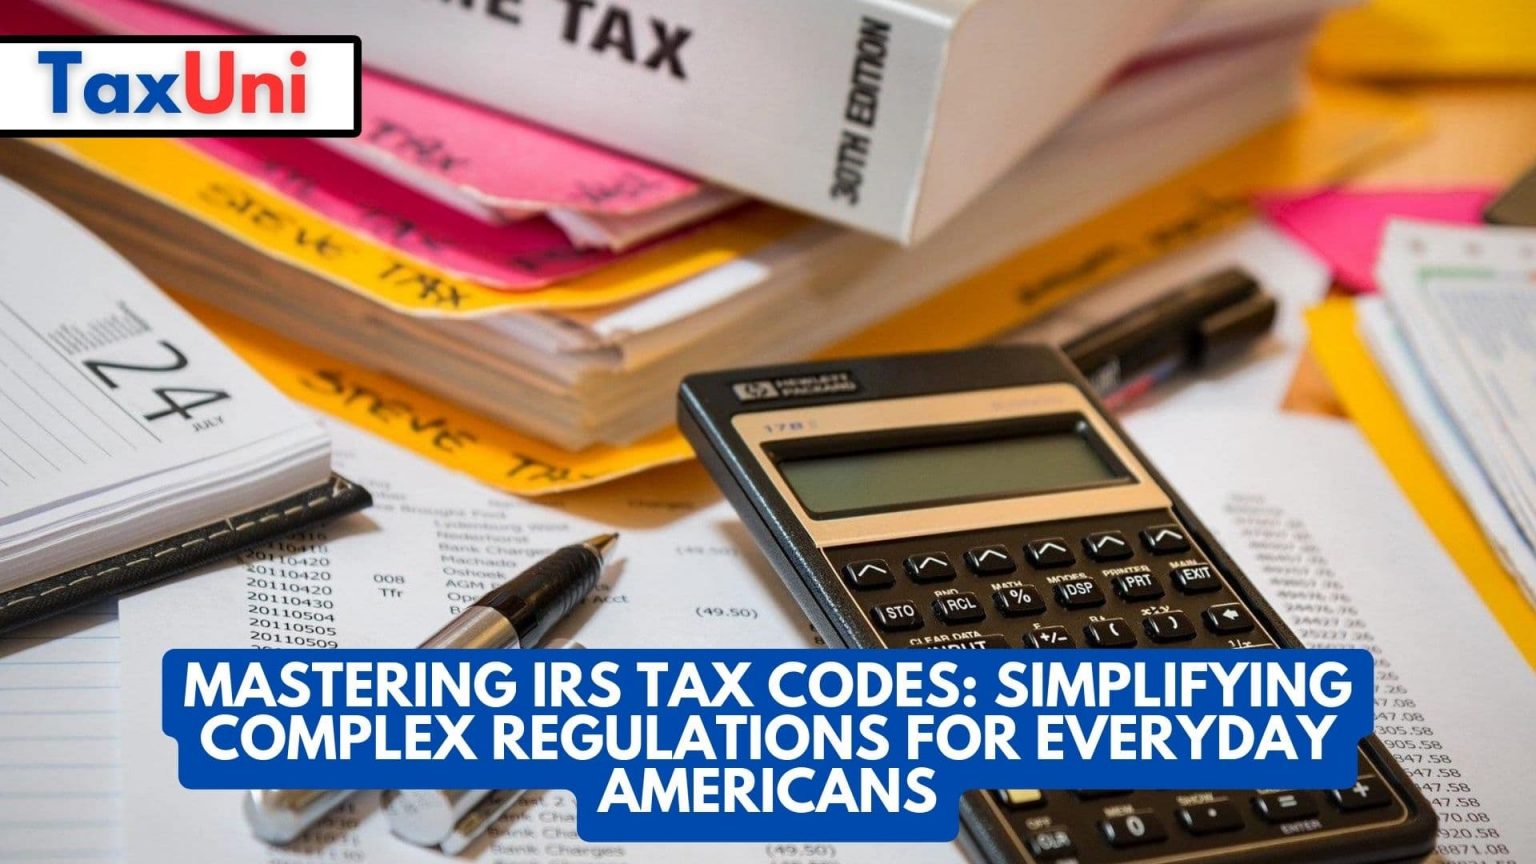 Mastering IRS Tax Codes Simplifying Complex Regulations for Everyday